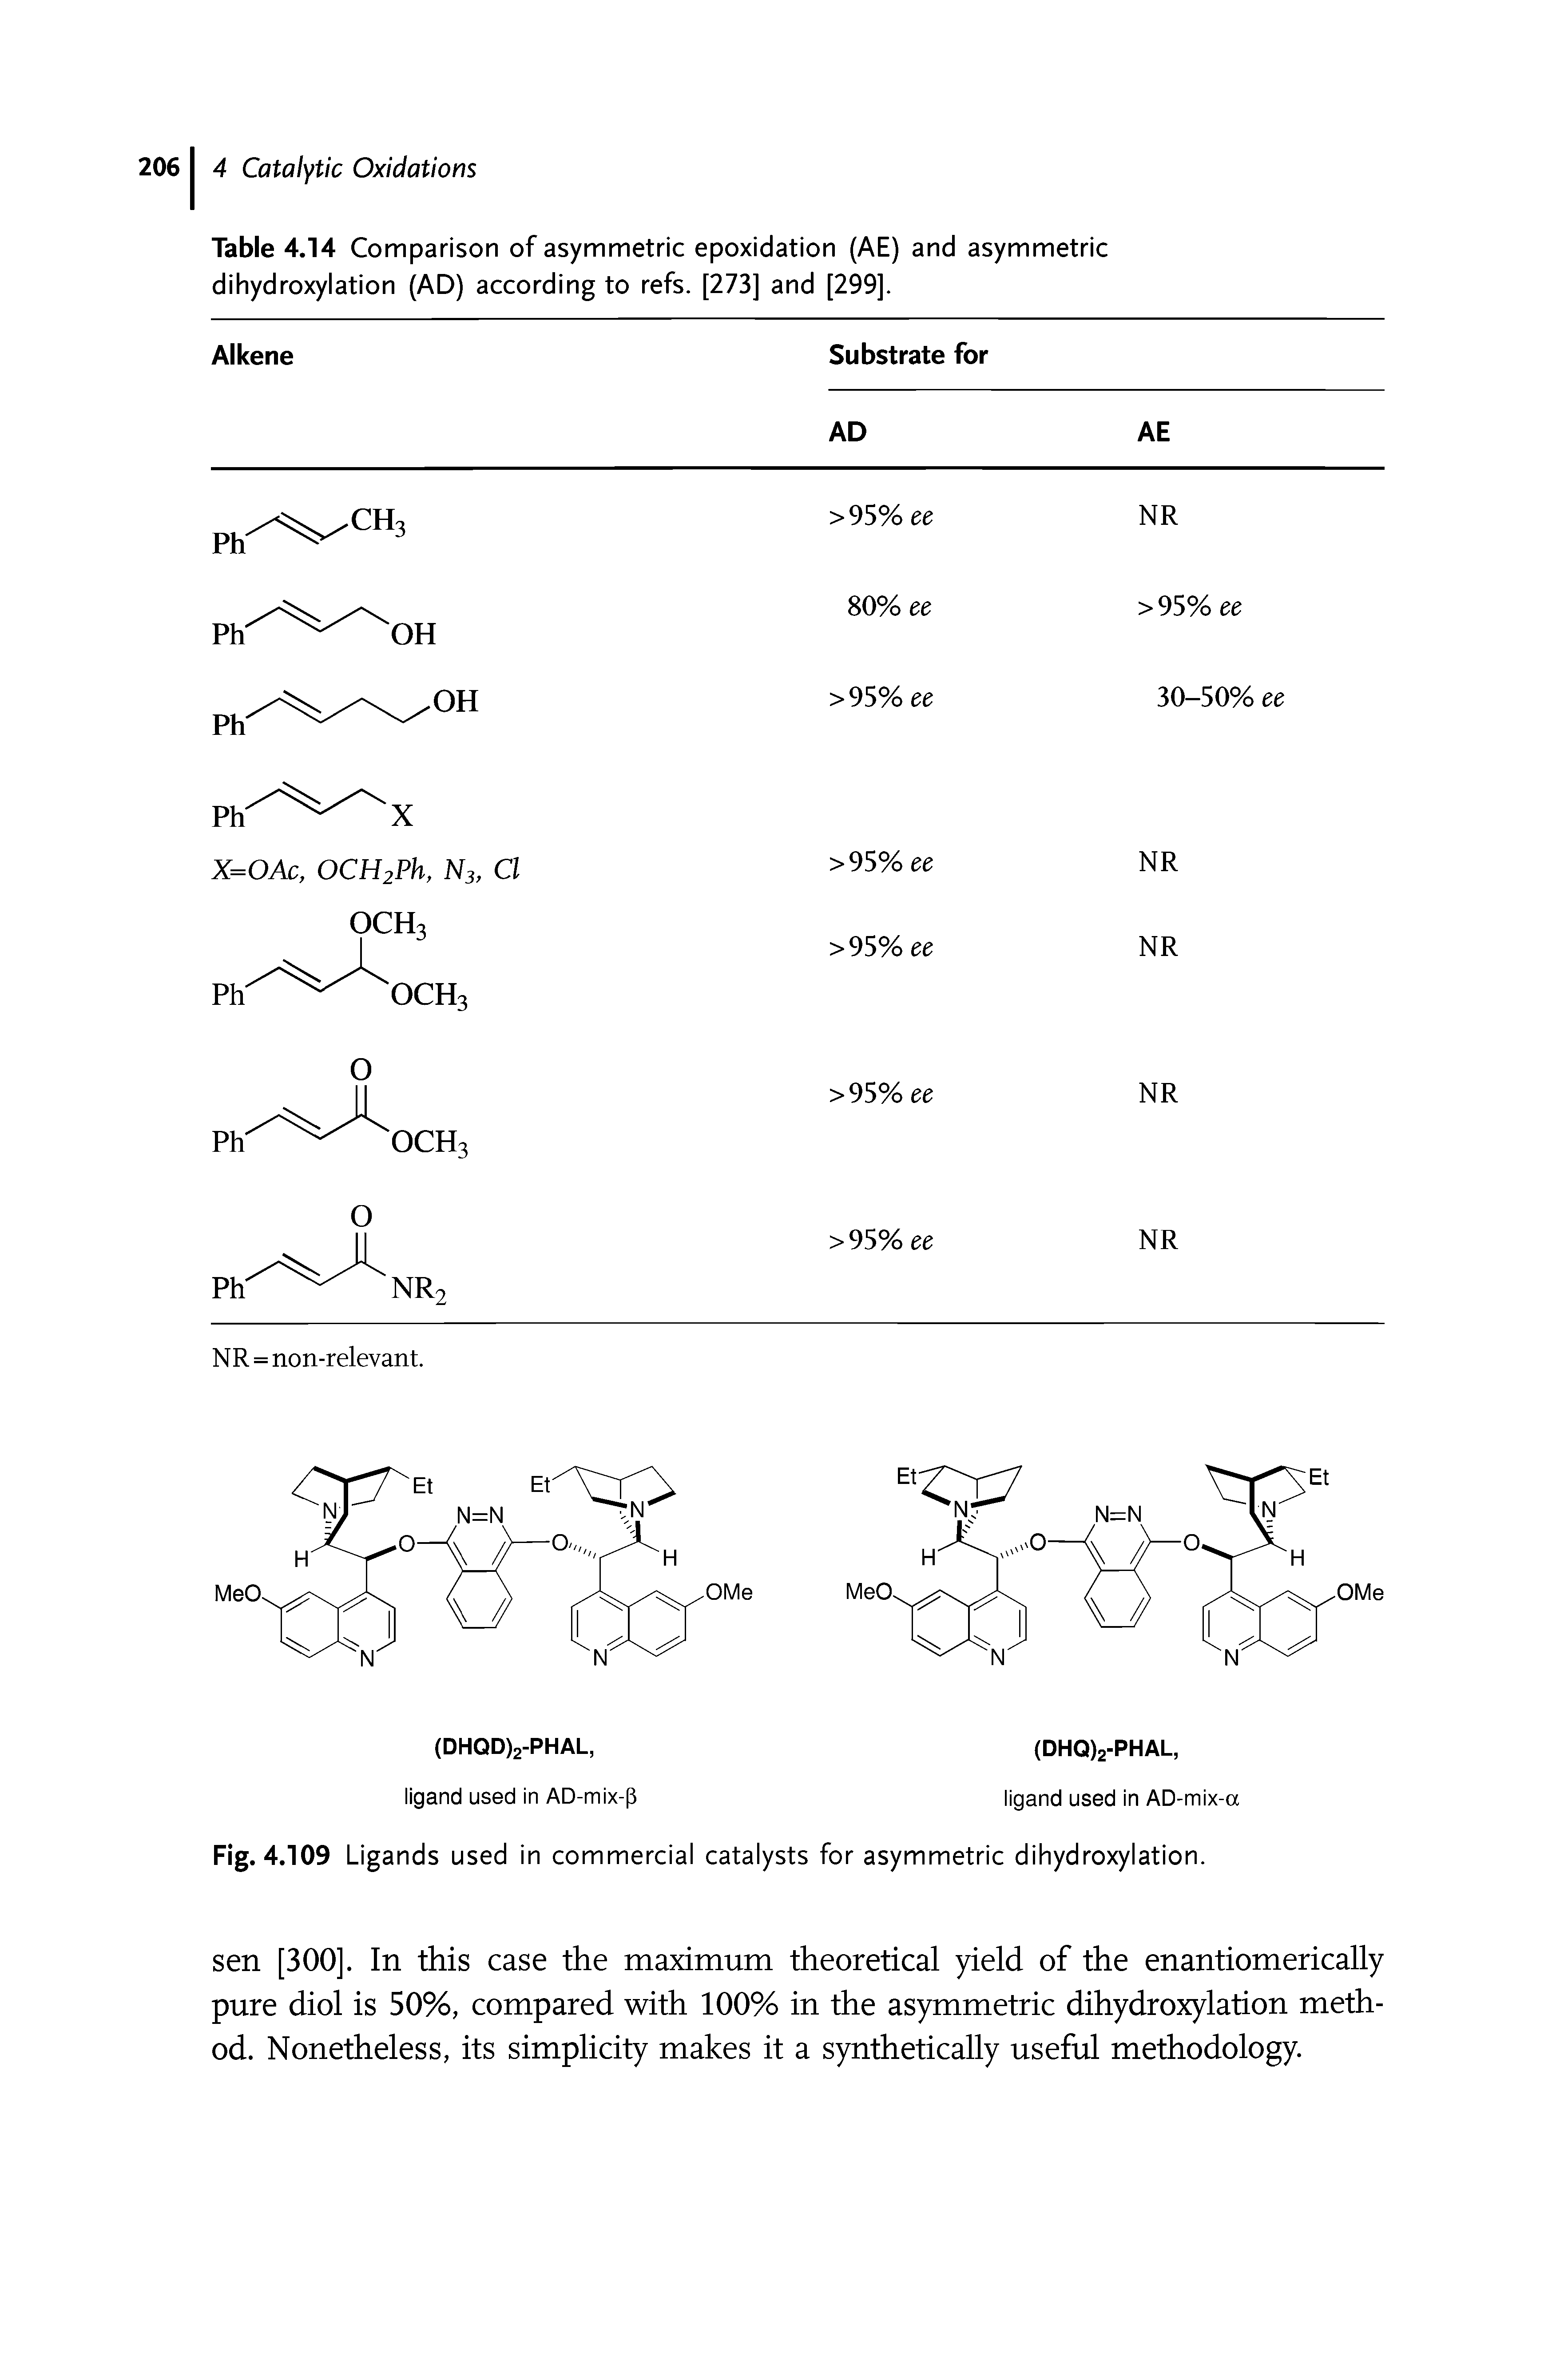 Fig. 4.109 Ligands used in commercial catalysts for asymmetric dihydroxylation.